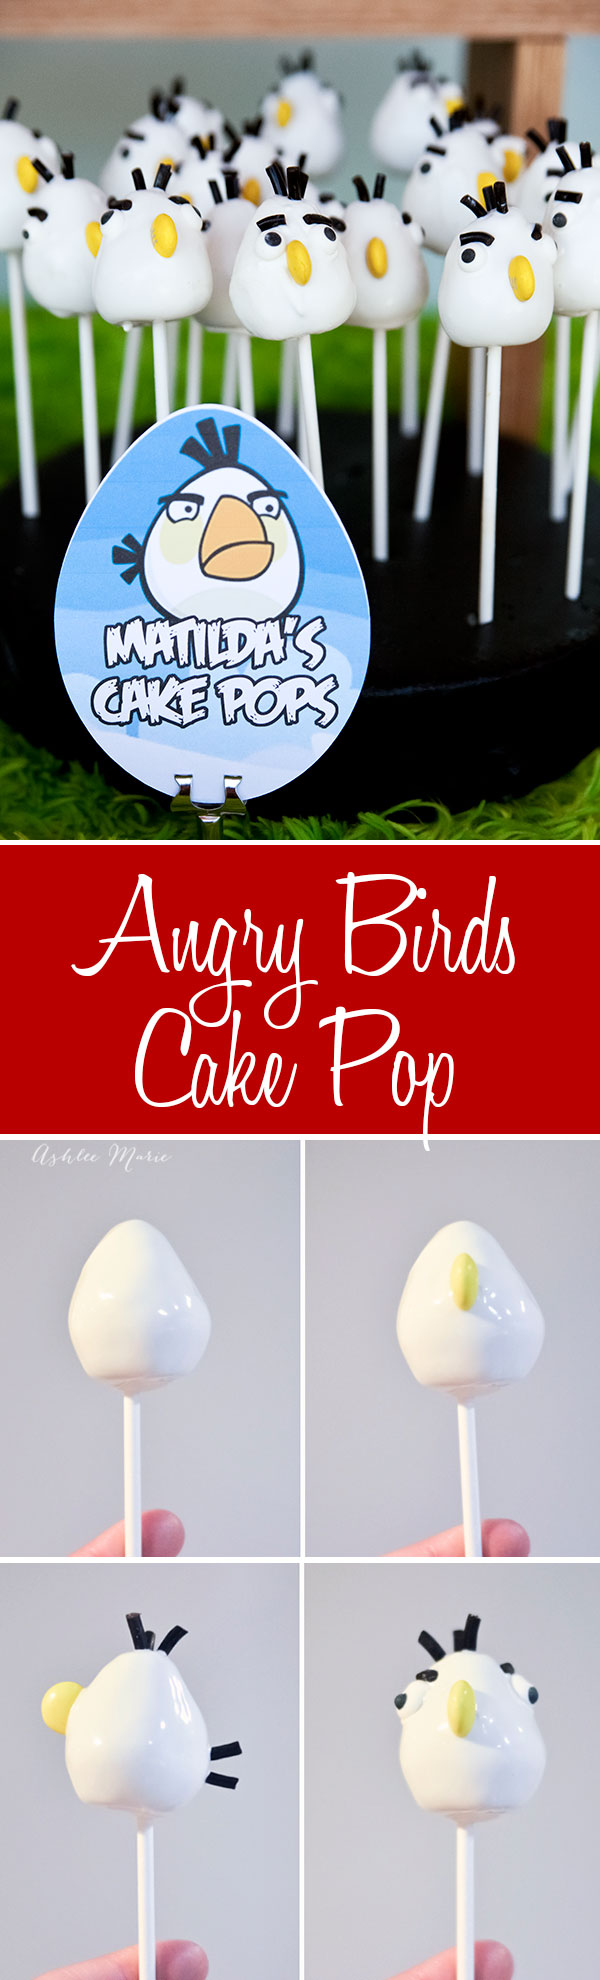 make your own angry bird cake pops, a tutorial to shape, dip and decorate your own bird, you can make this one, matilda or use the same tips to make any of the other birds